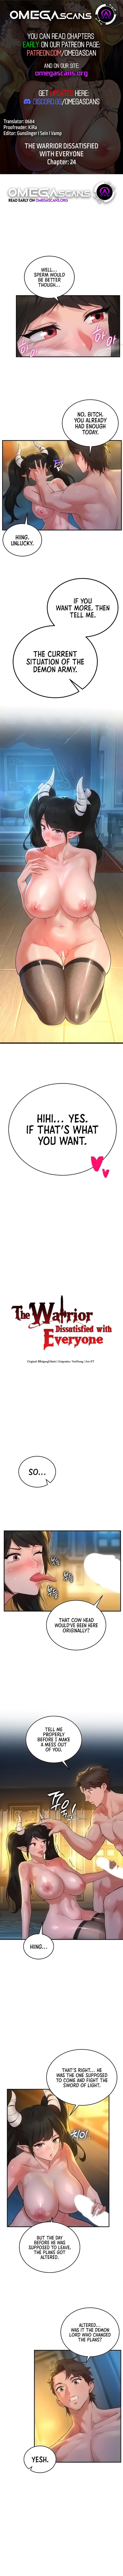 the-warrior-dissatisfied-with-everyone-chap-24-0